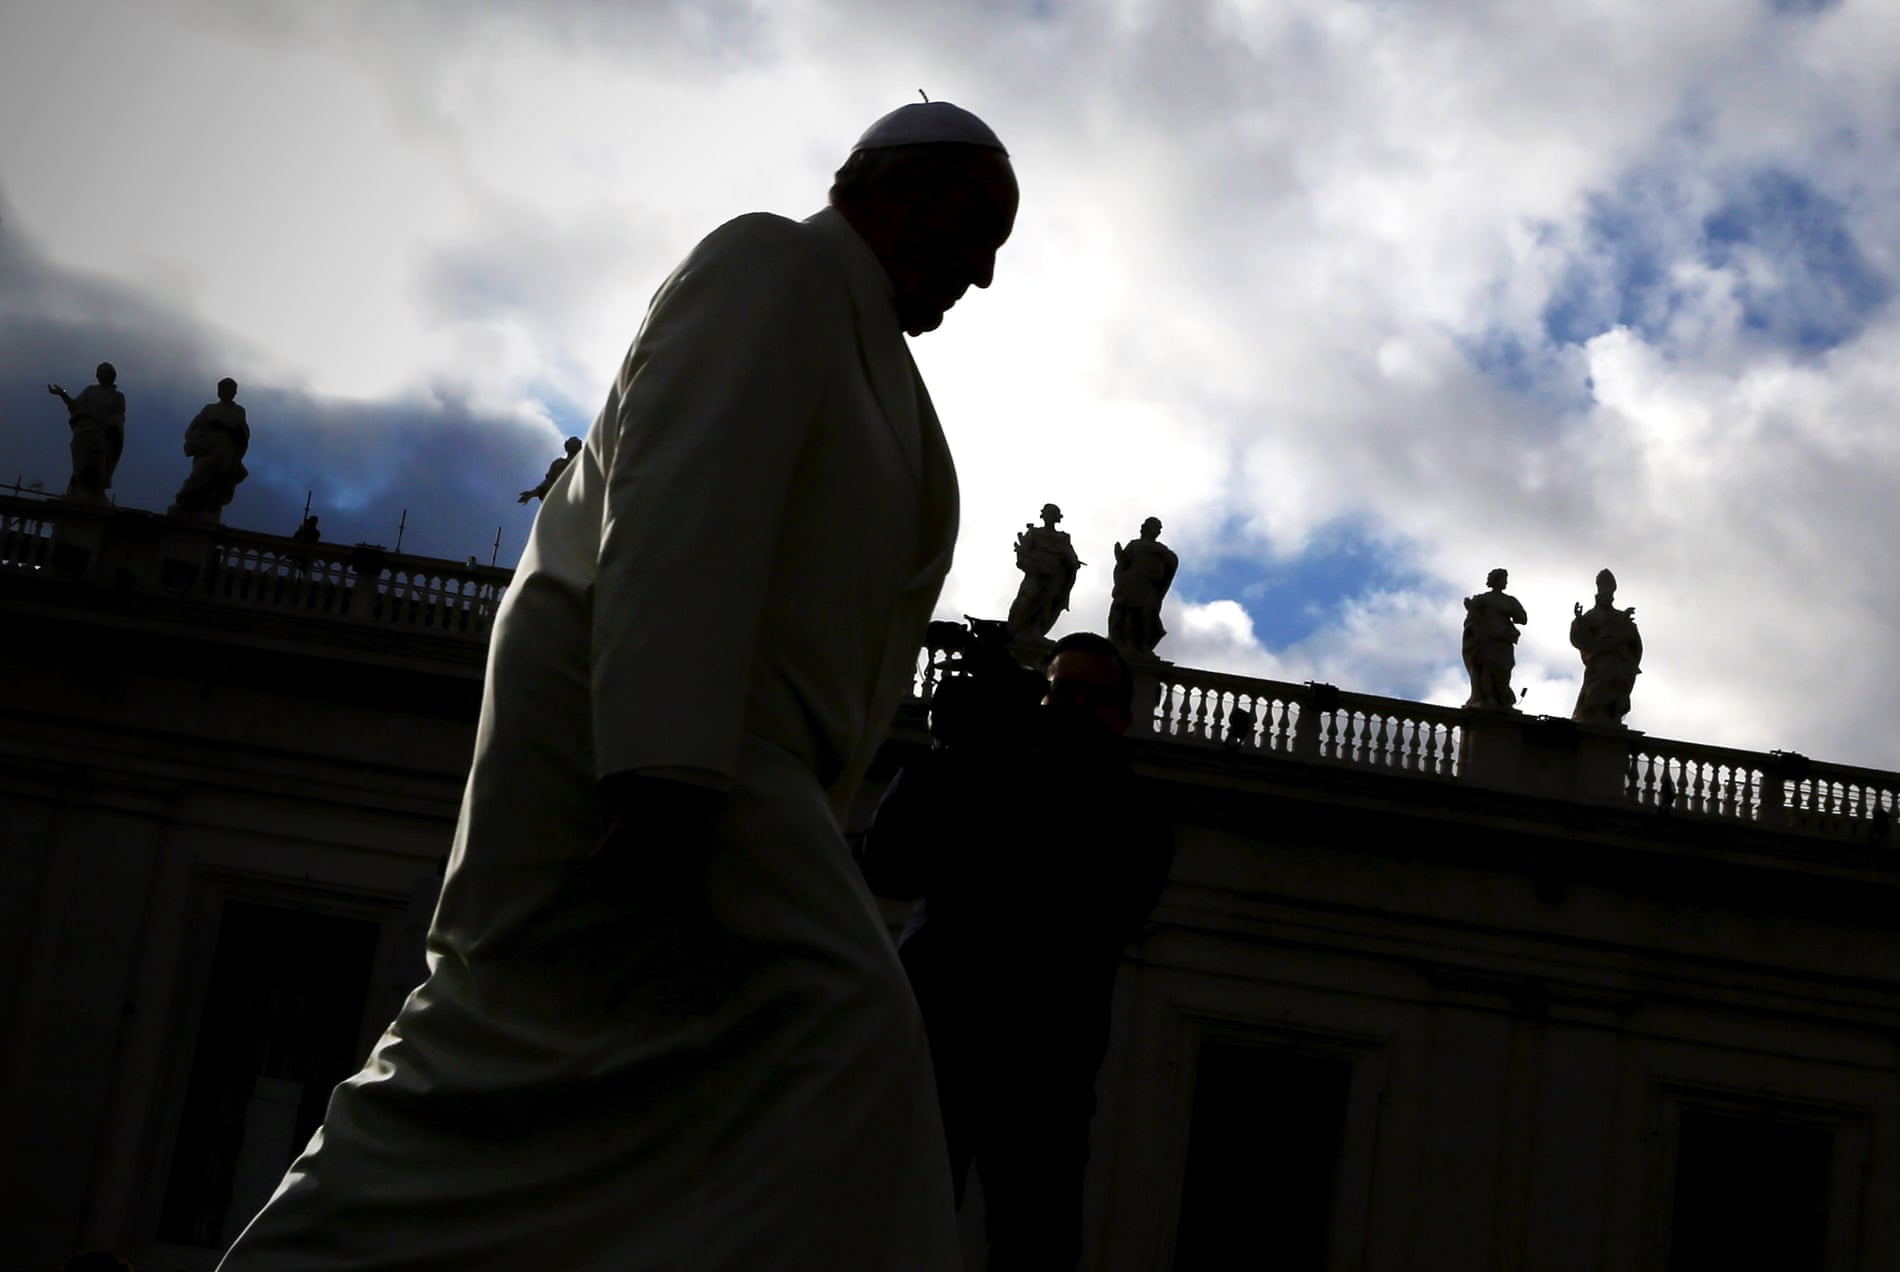 Pope Francis arrives in St. Peter’s square for his weekly audience